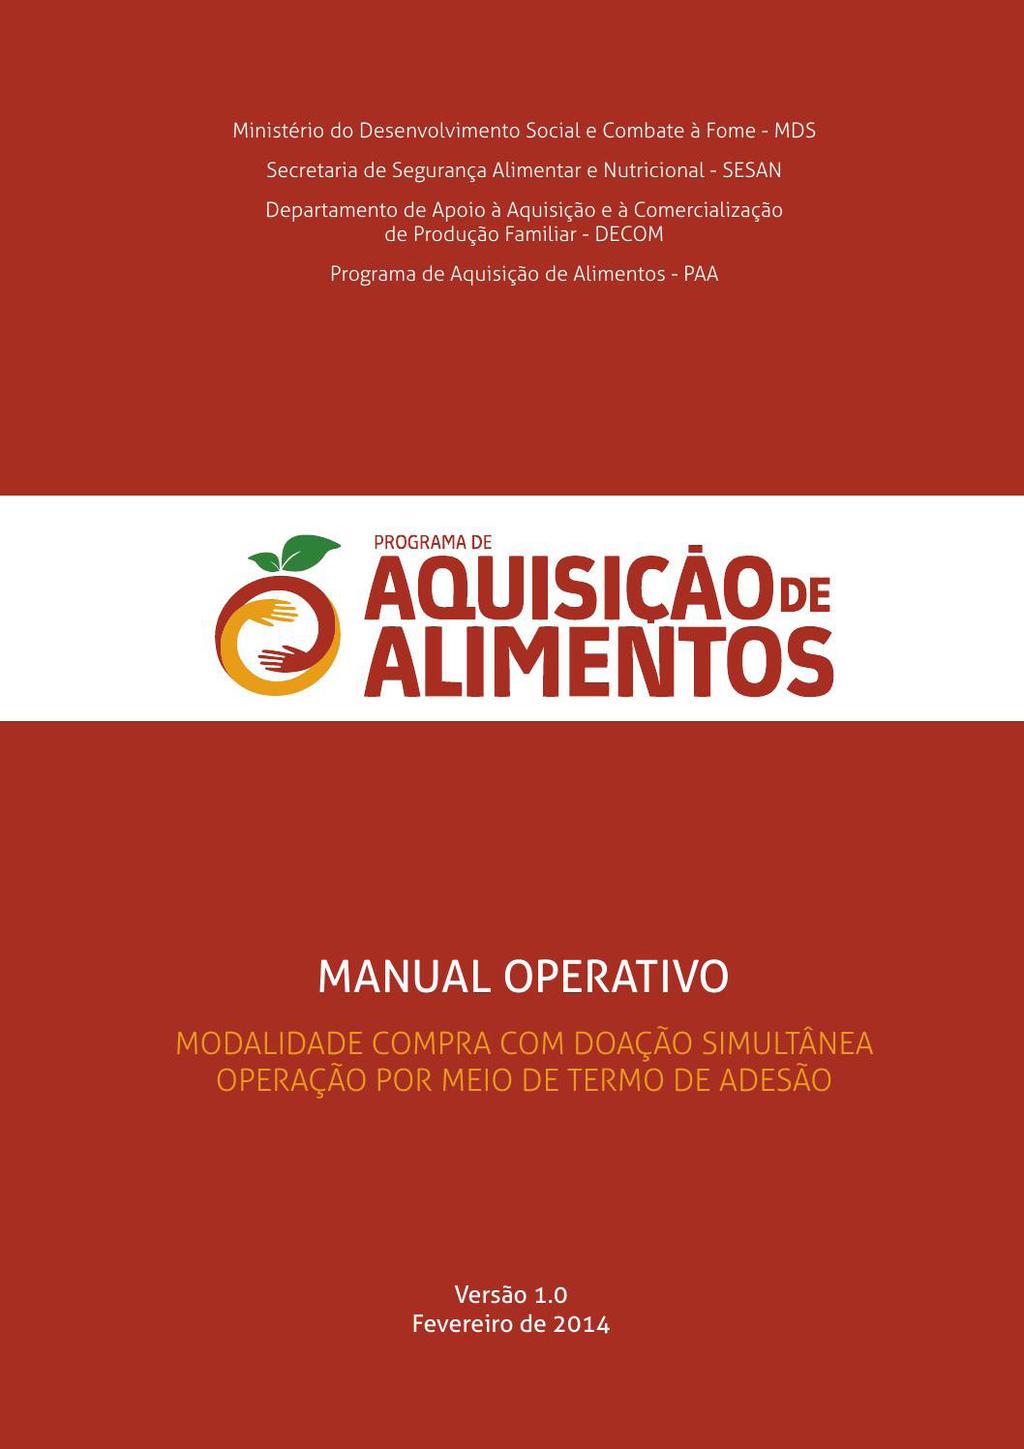 PAA Operating Manual This Manual provides general guidance on how the states and municipalities can access the Program.